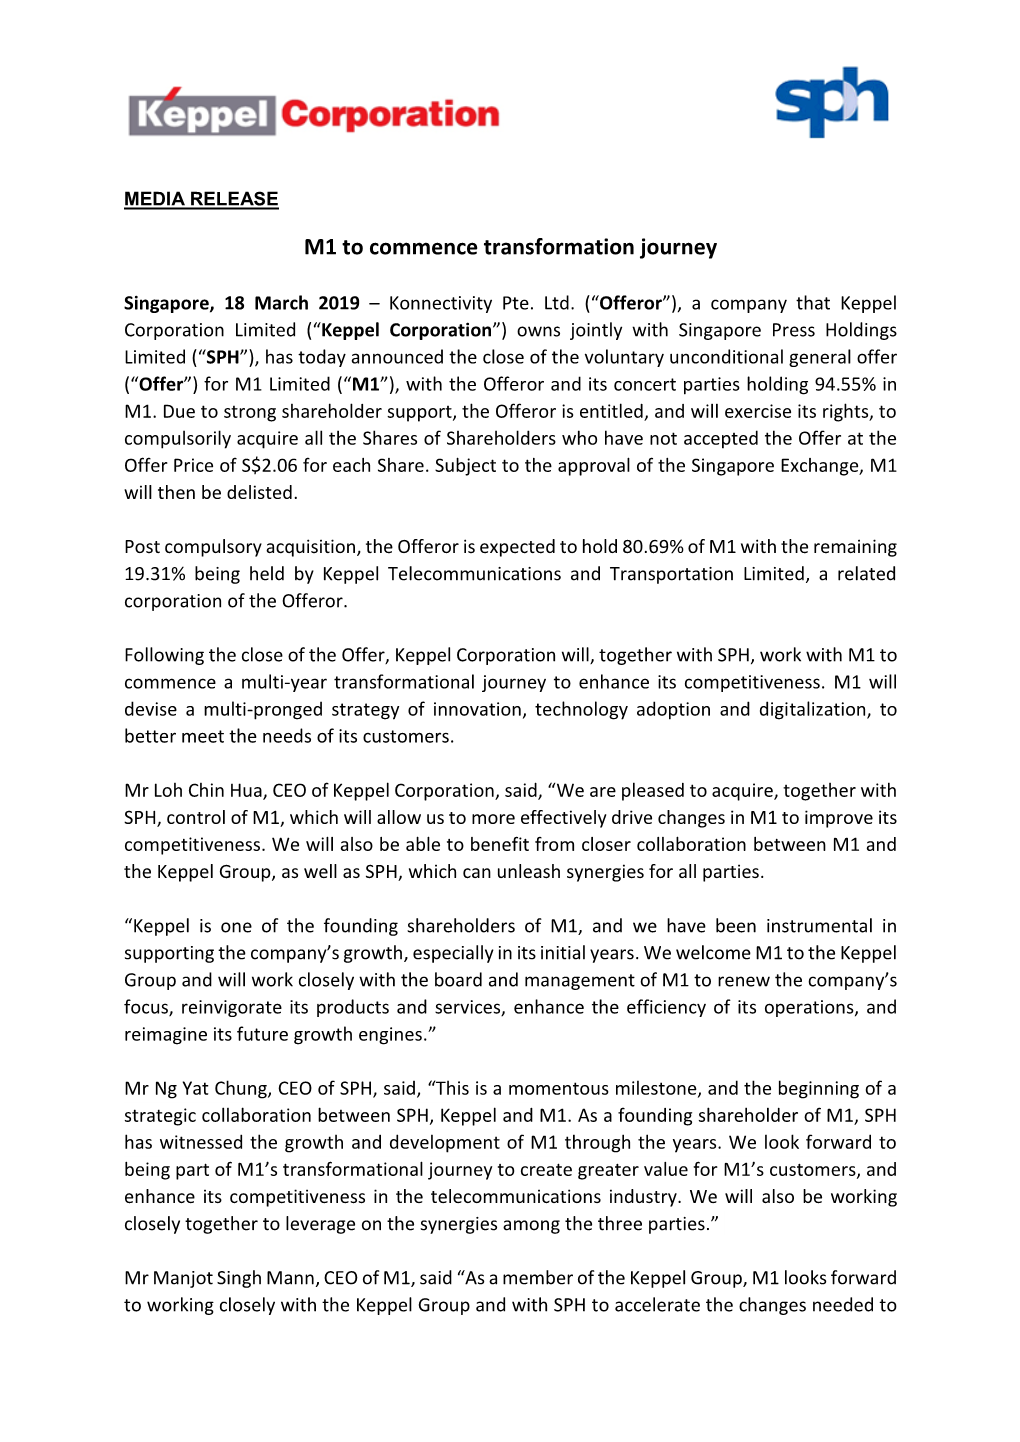 M1 to Commence Transformation Journey